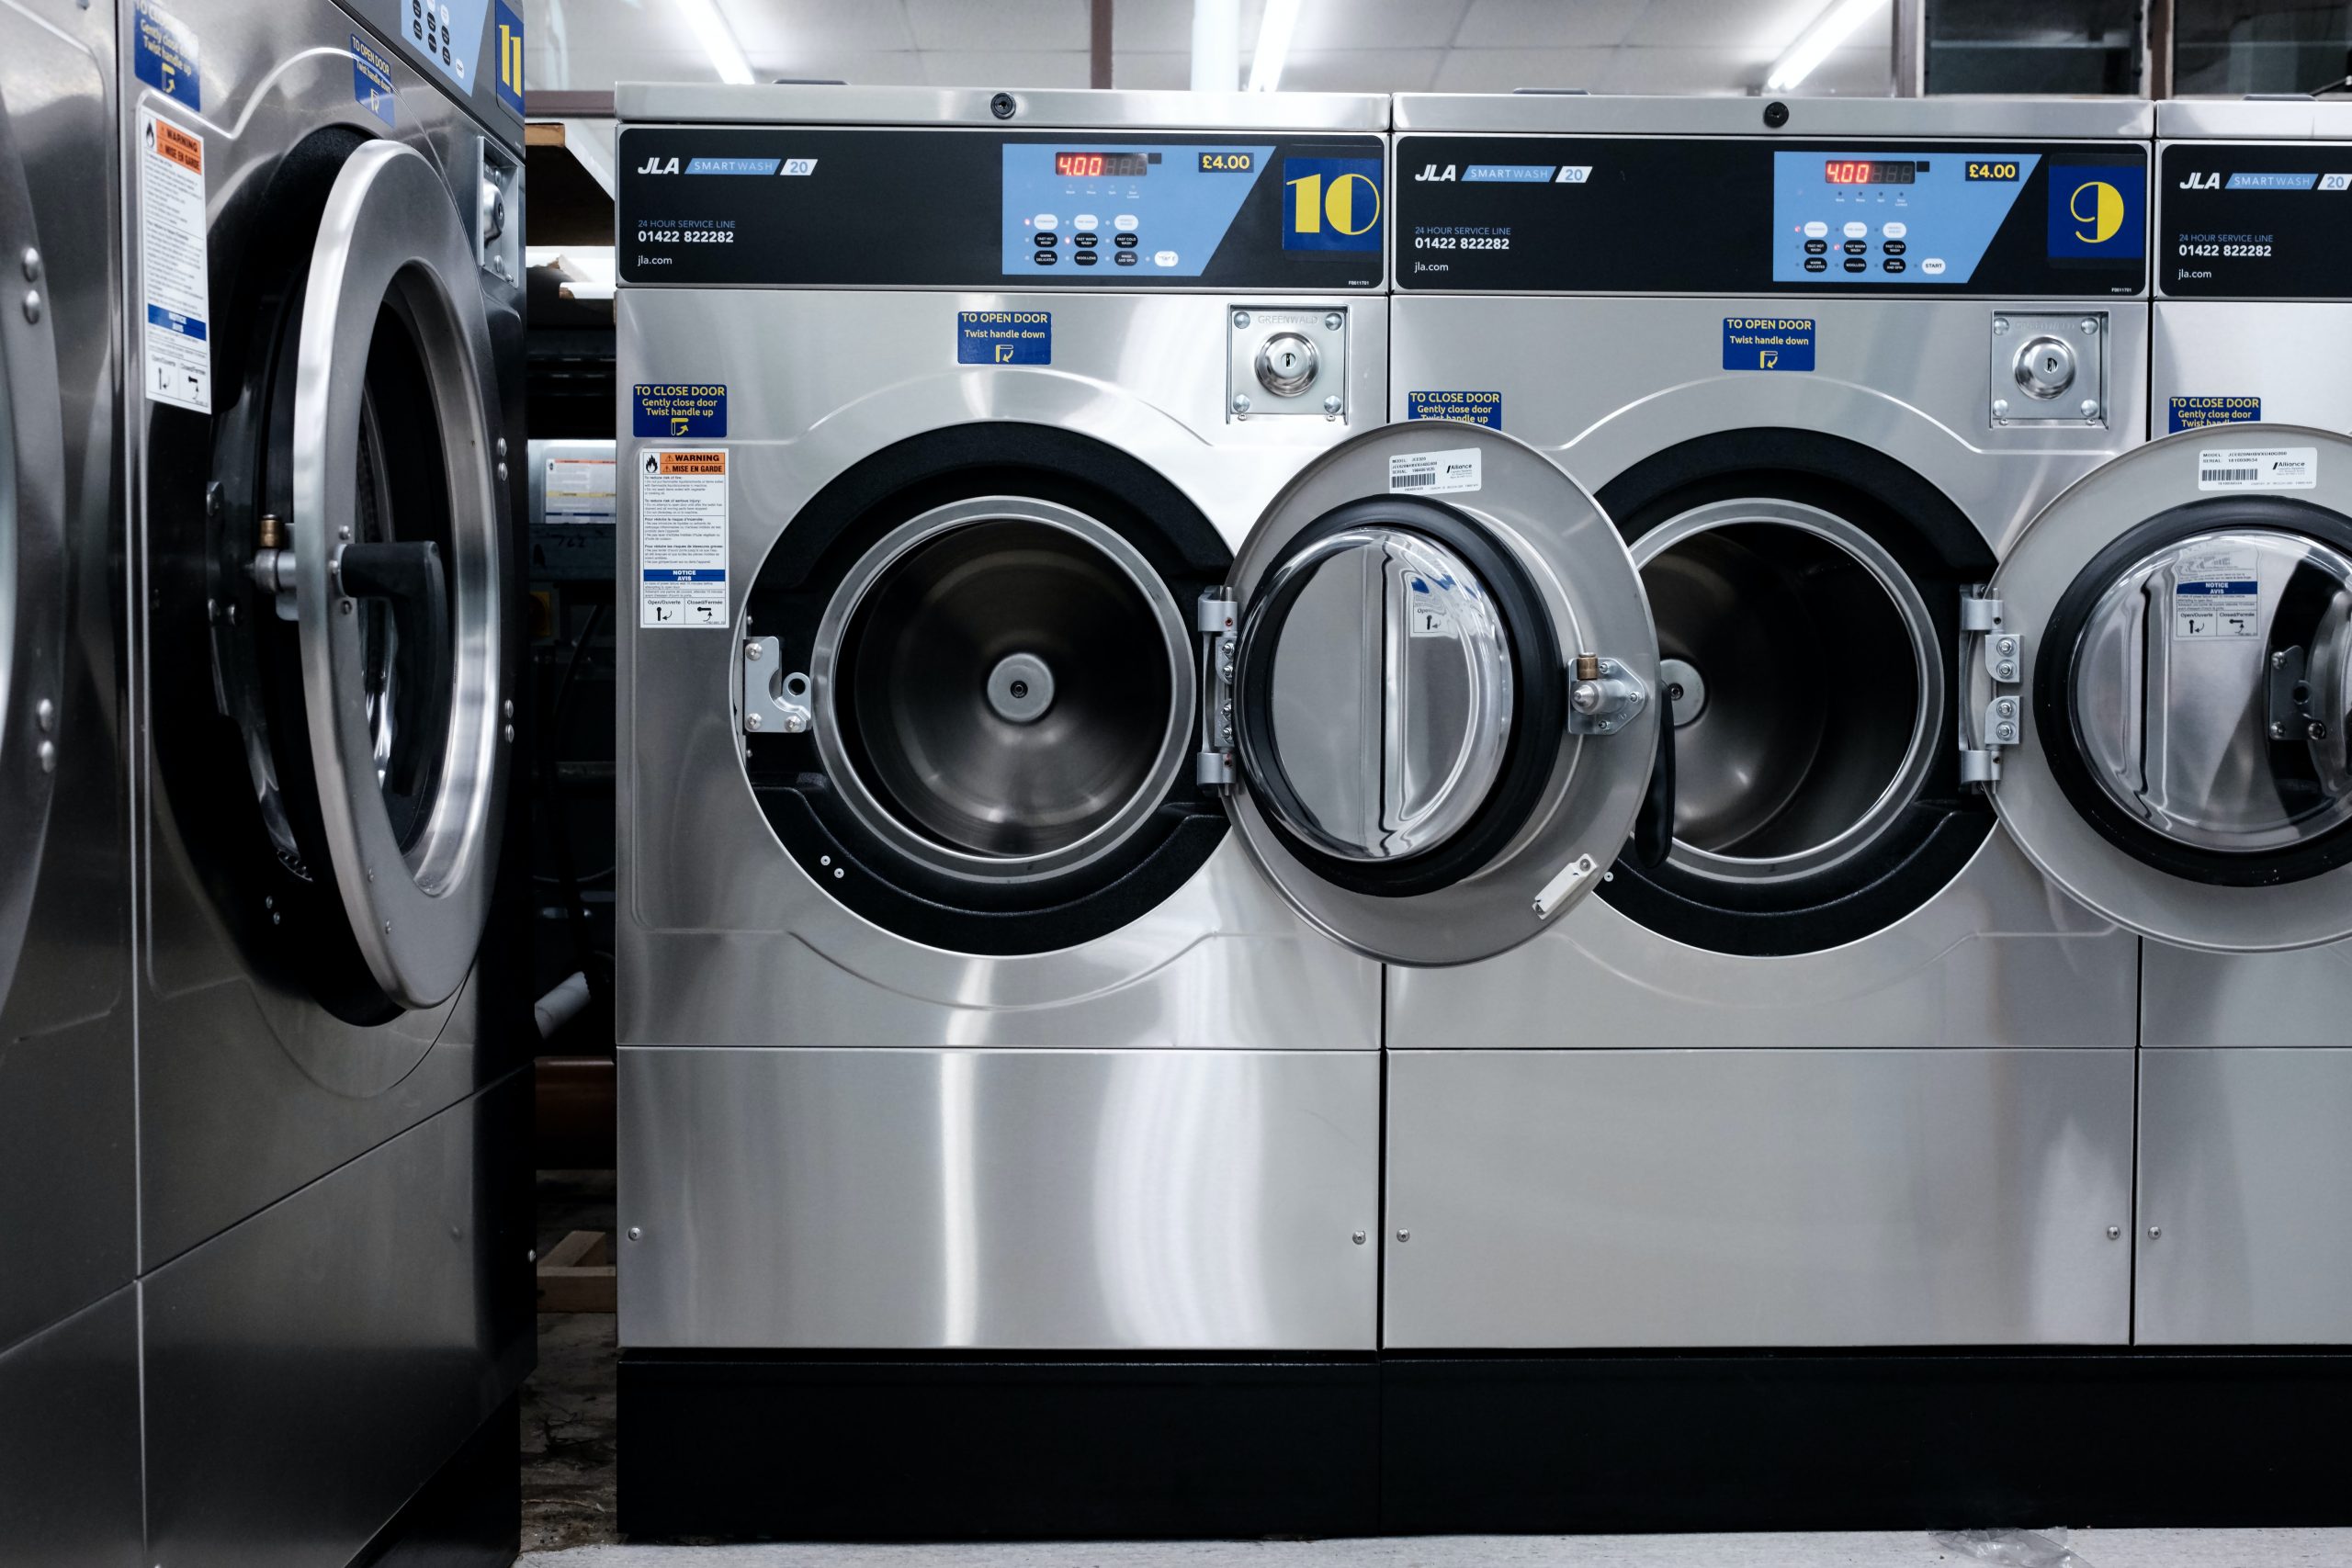 How to Reset Maytag Centennial Washer